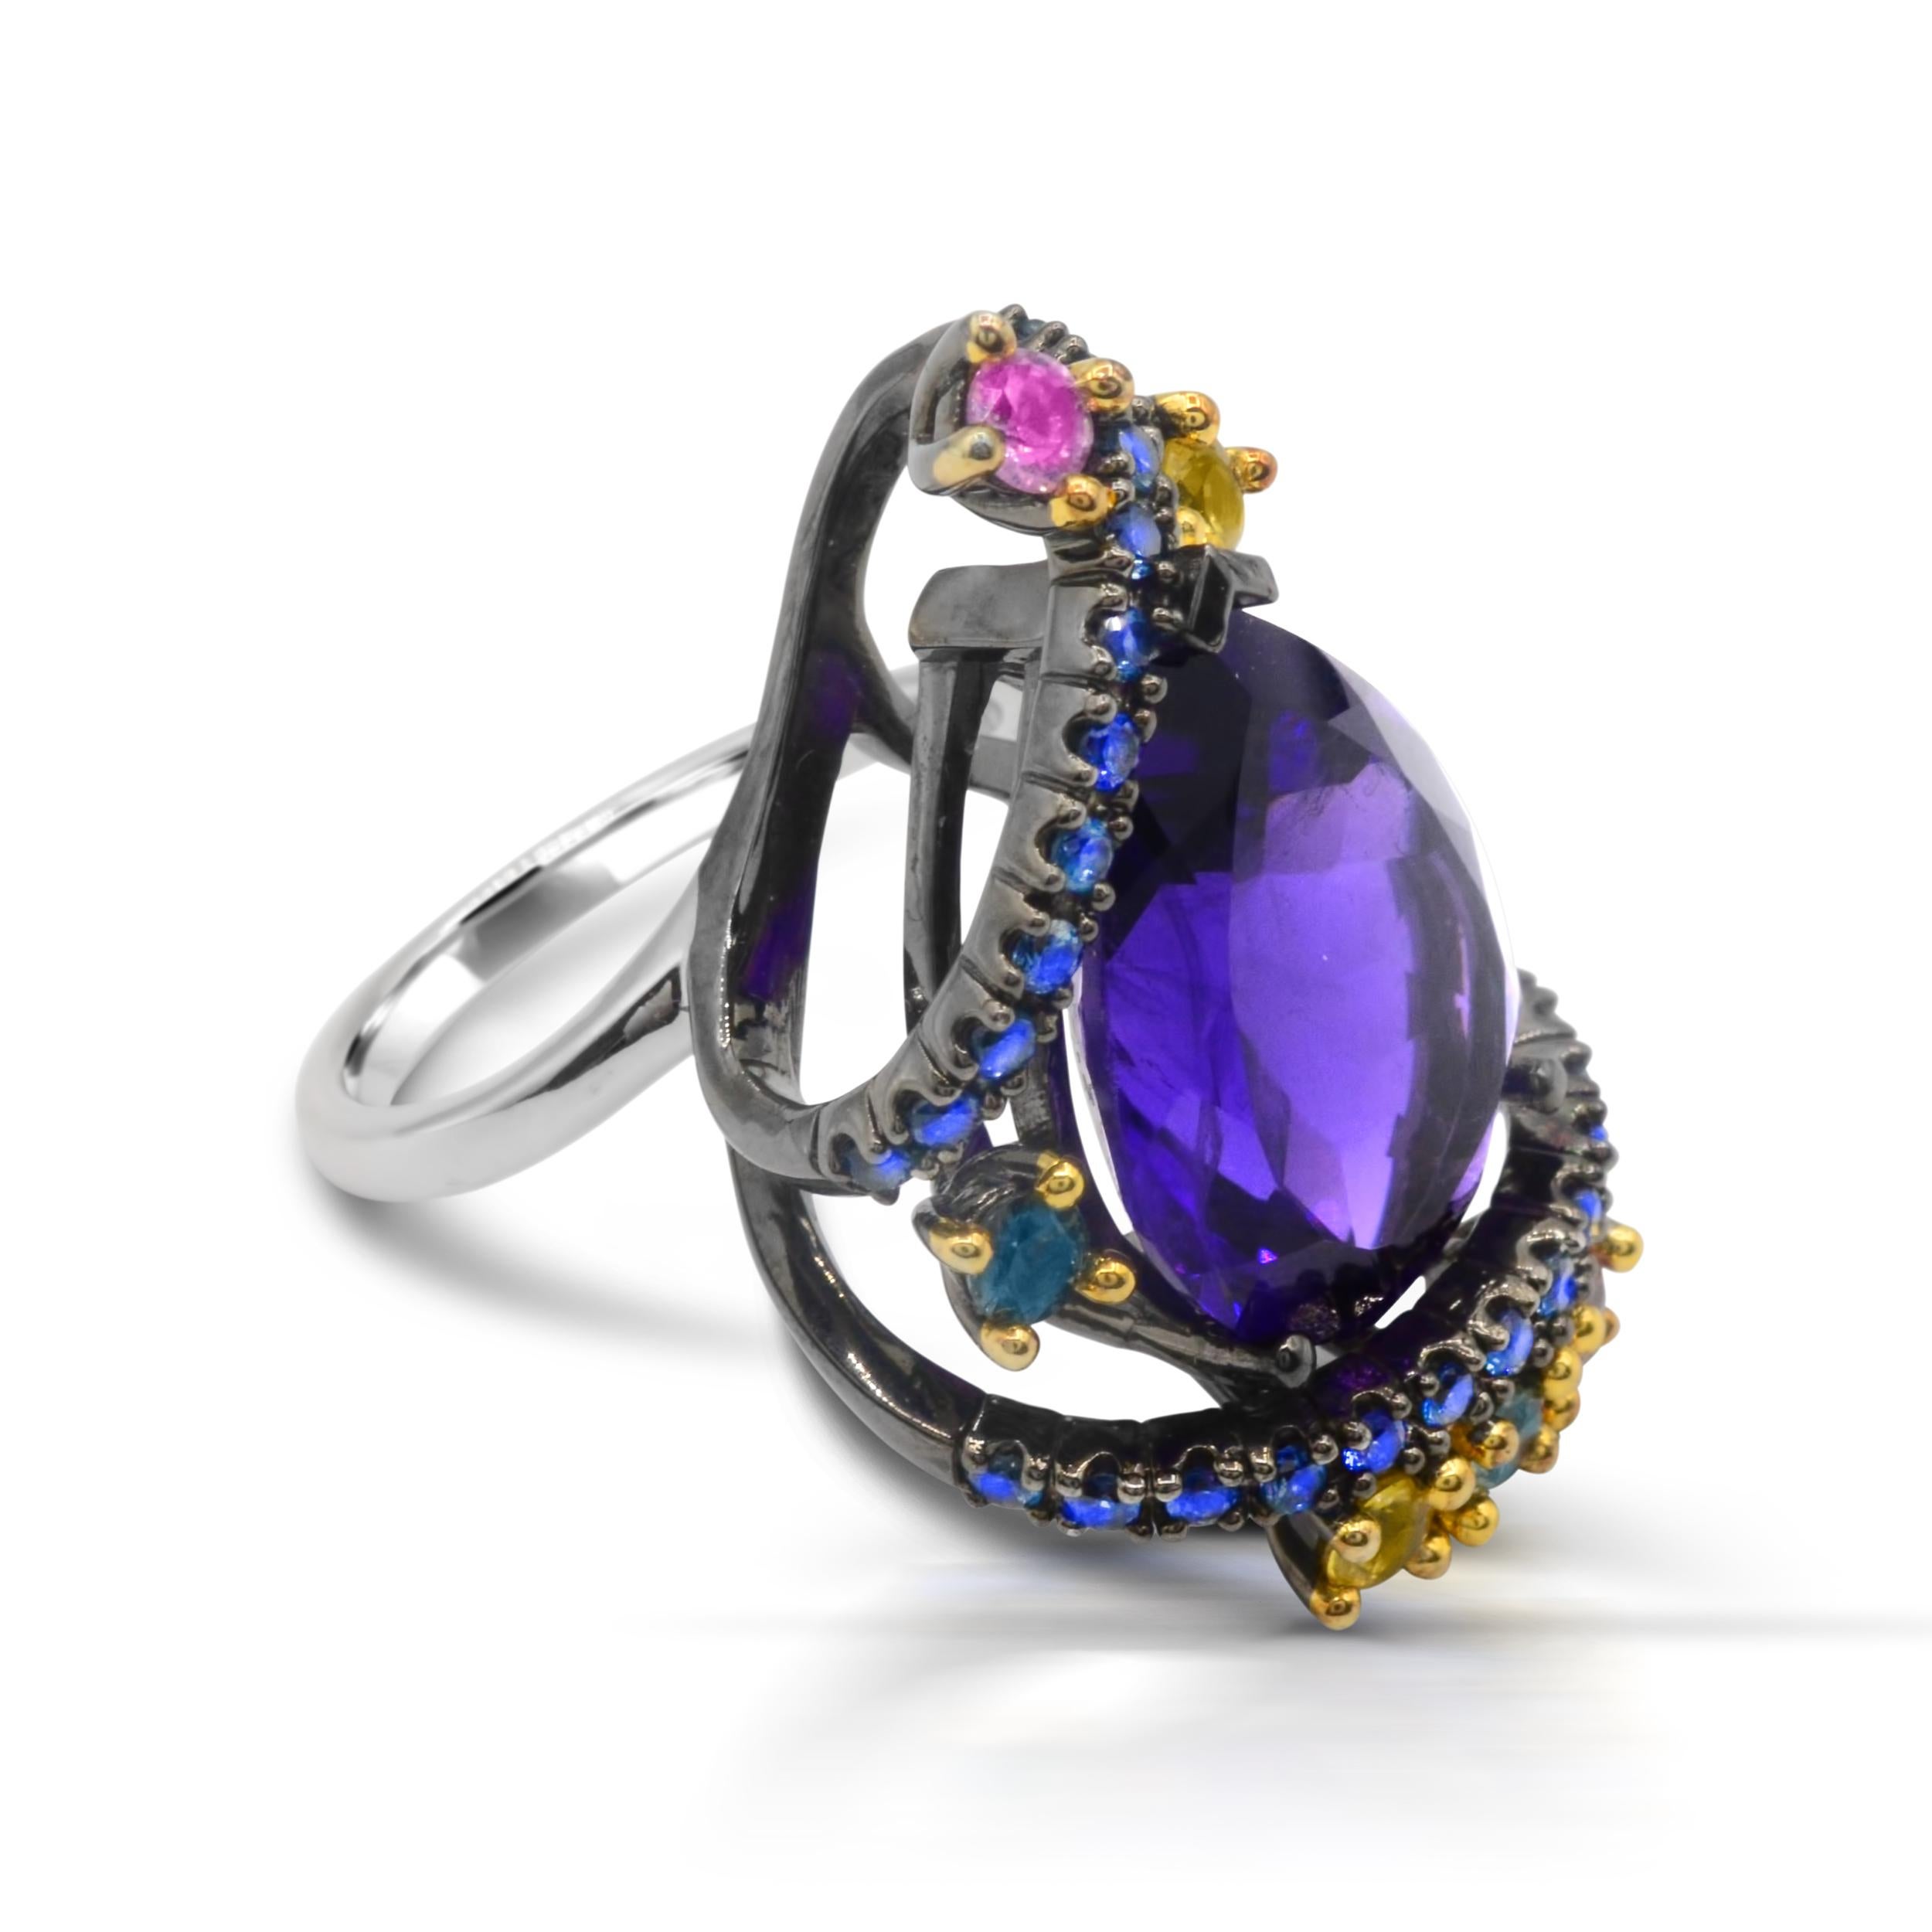 An exquisite ring that features 18x13 Pear-shaped Amethyst accented with Multicolor Natural Sapphire around it.  Crafted in Sterling silver with a beautifully constructed undergallery and black rhodium embraced detailing, this ring shines with a